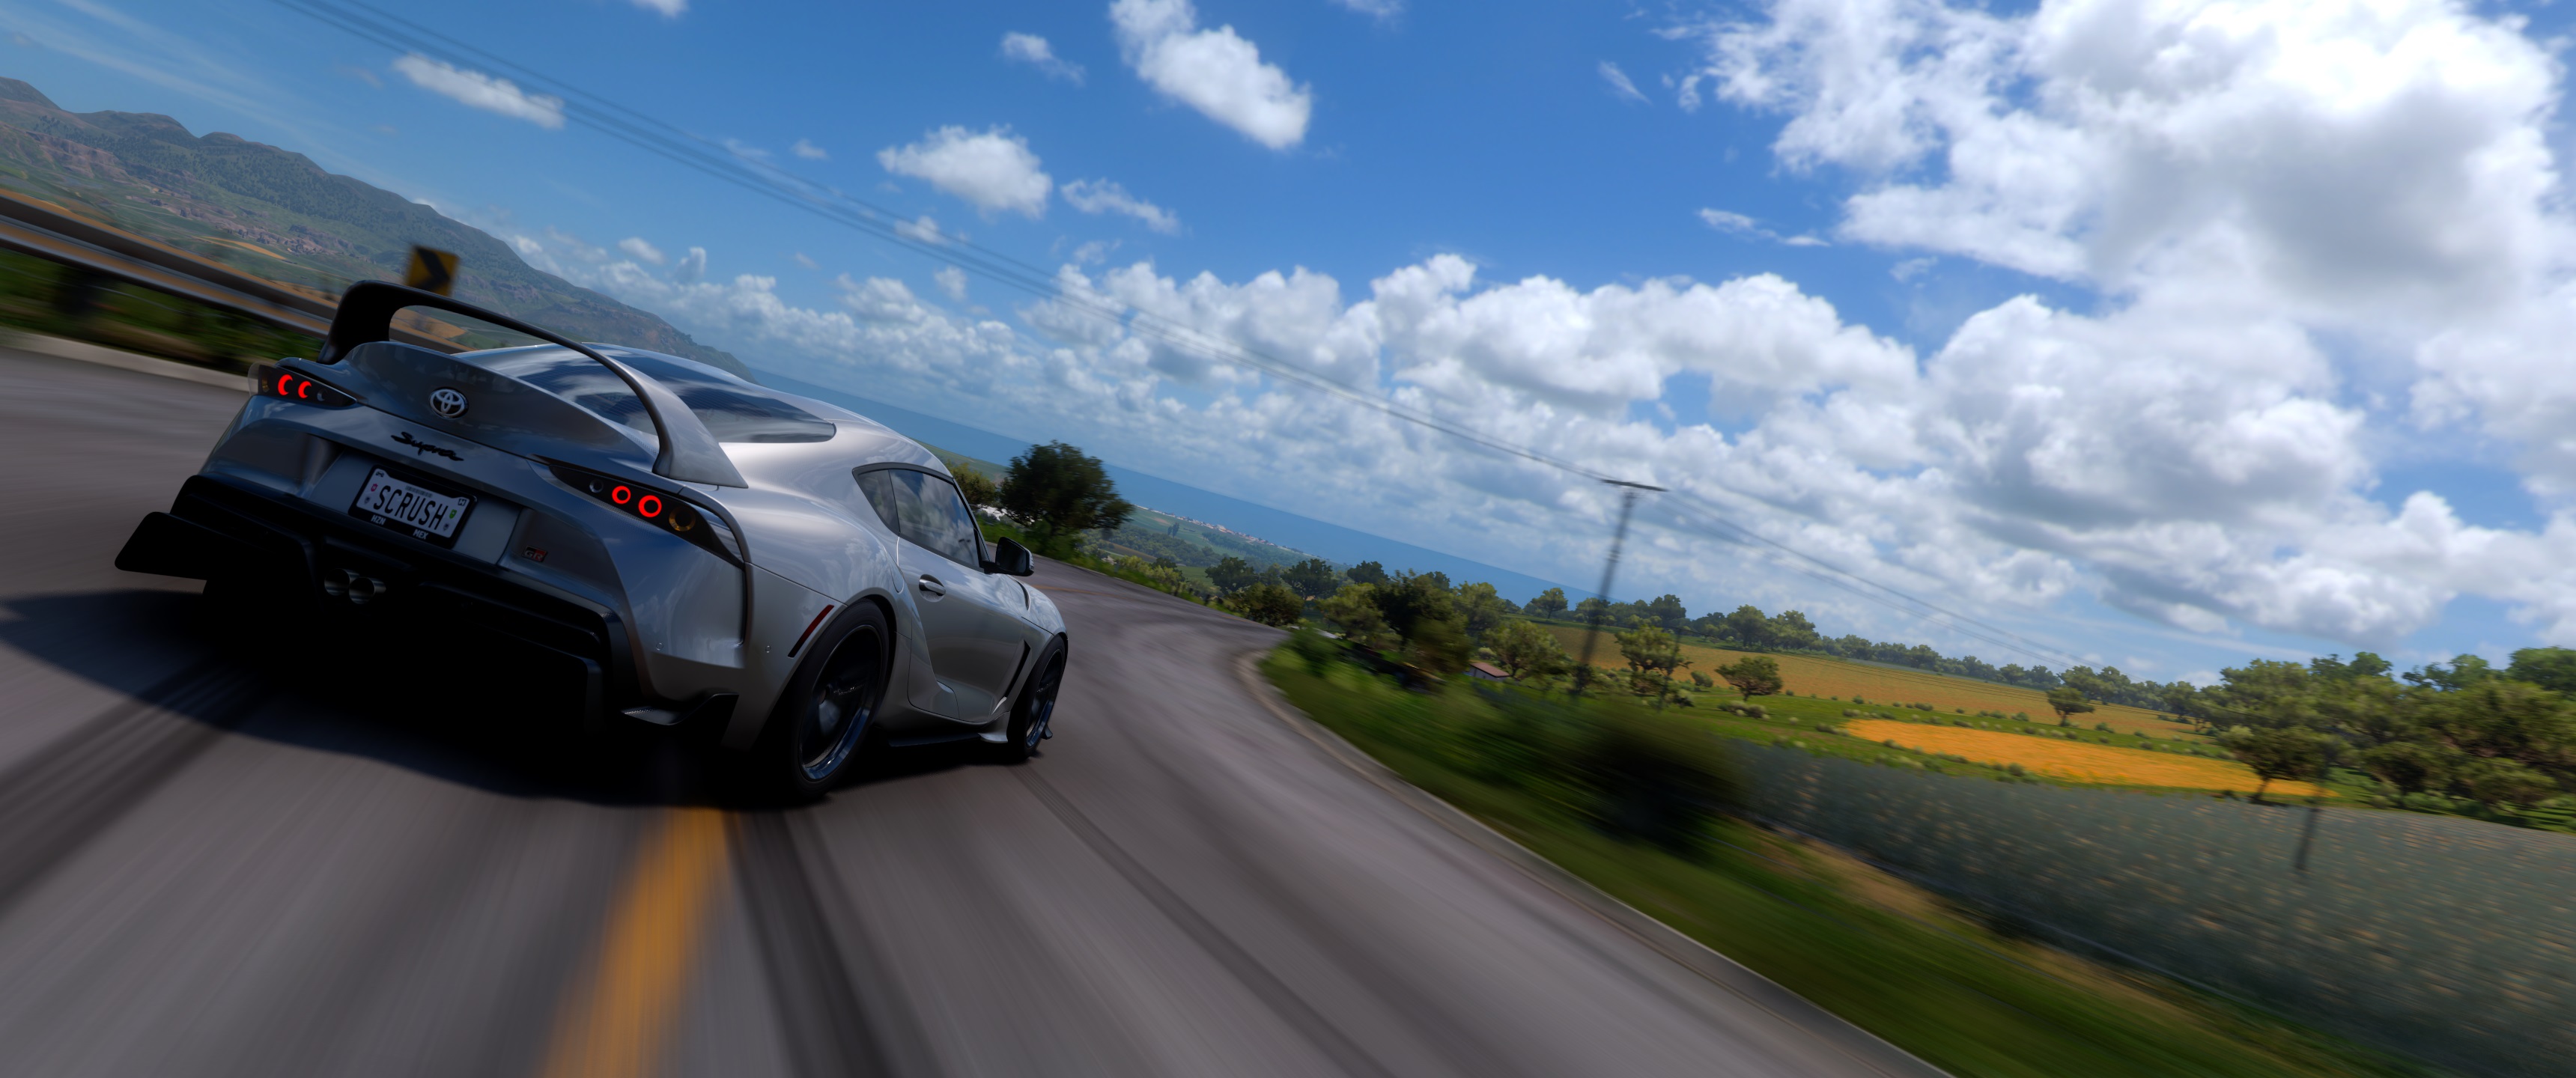 General 3440x1440 Forza Horizon 5 video games Mexico car road taillights clouds